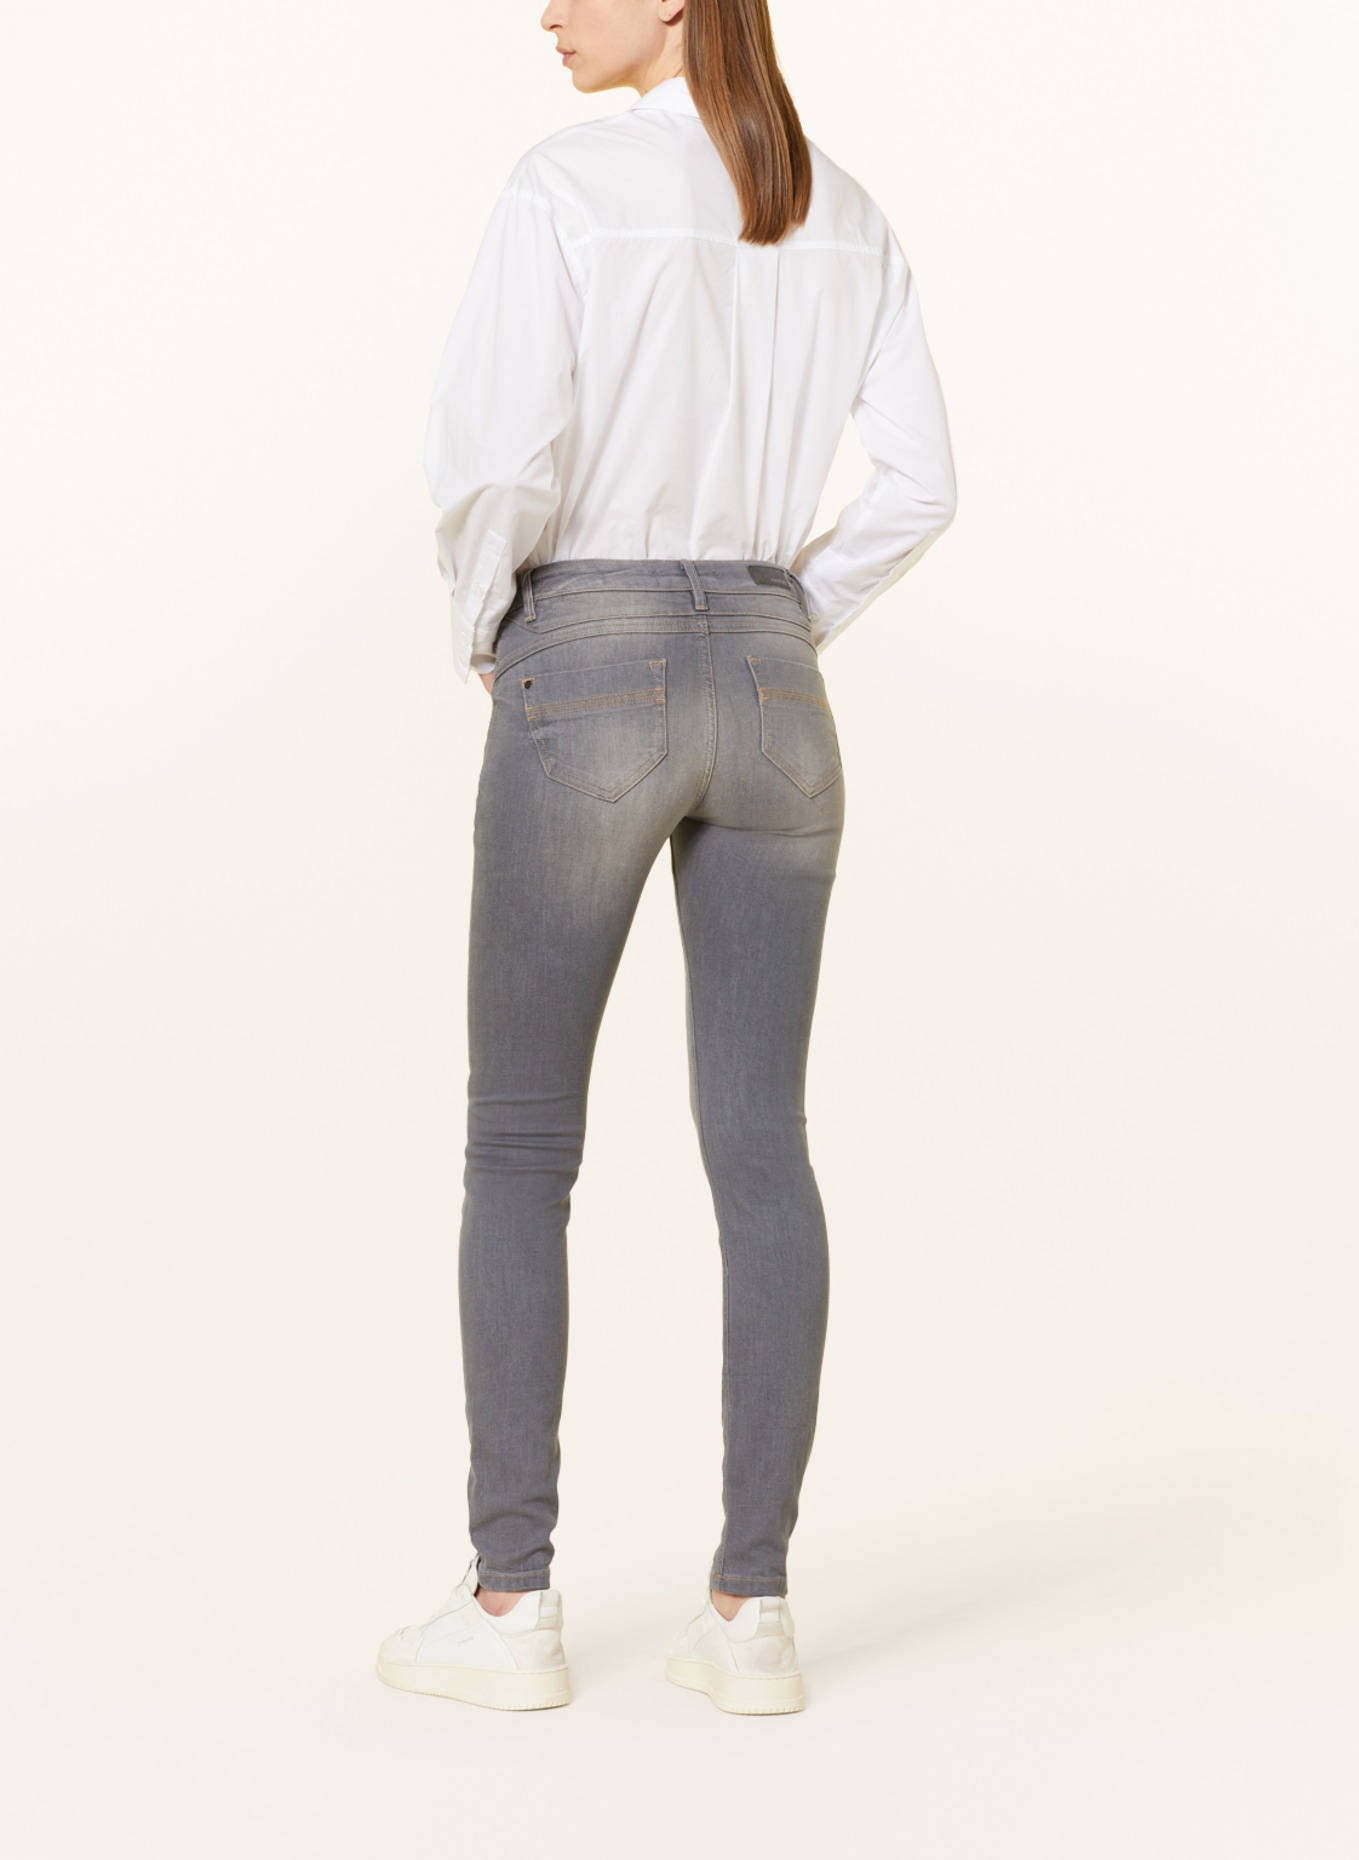 GANG Skinny Jeans NELE with decorative gems, Color: 7996 stared grey washed (Image 3)